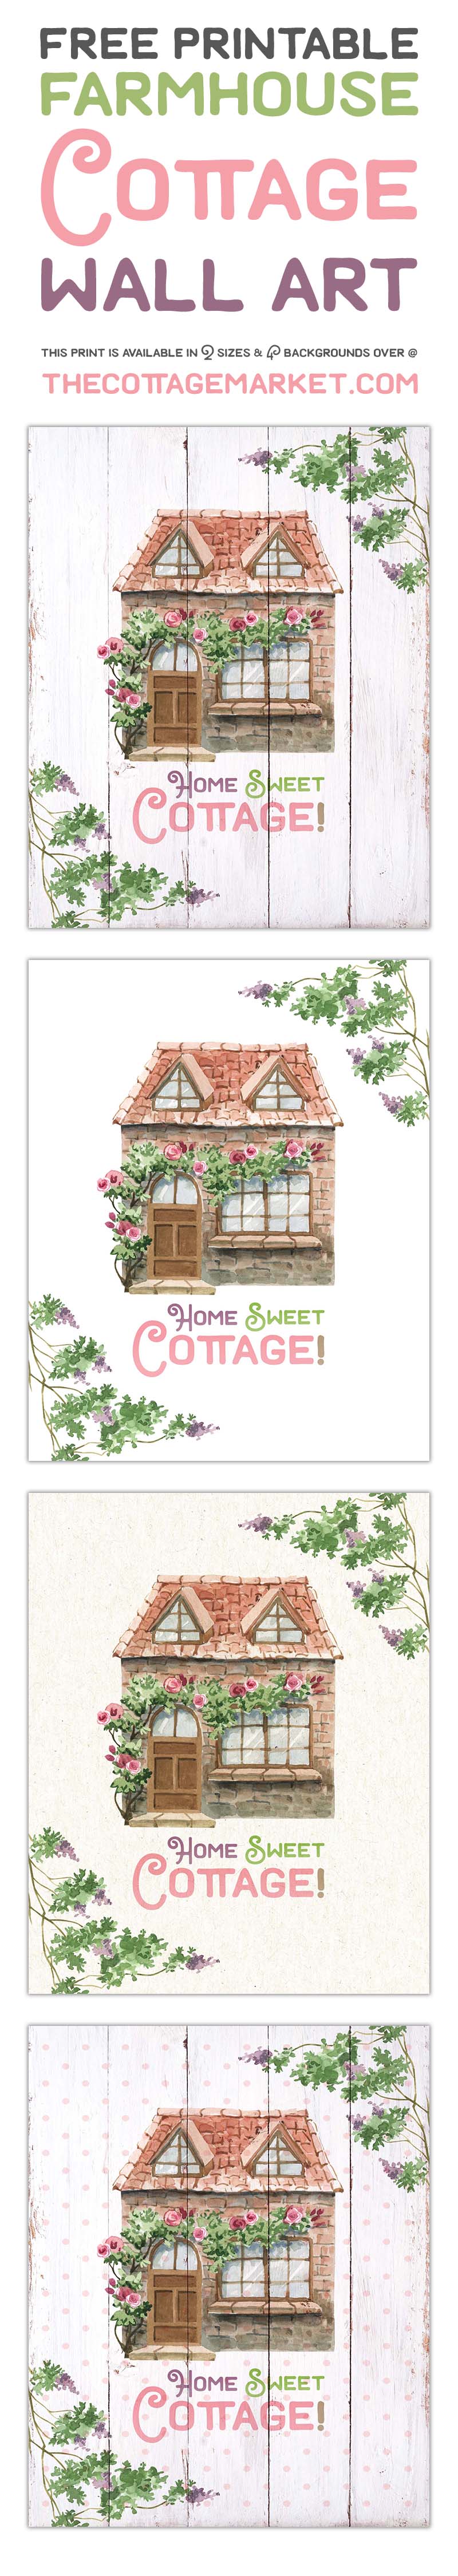 This Free Printable Farmhouse Cottage Wall Art Will Bring A Ton Of Charm To Your Home.